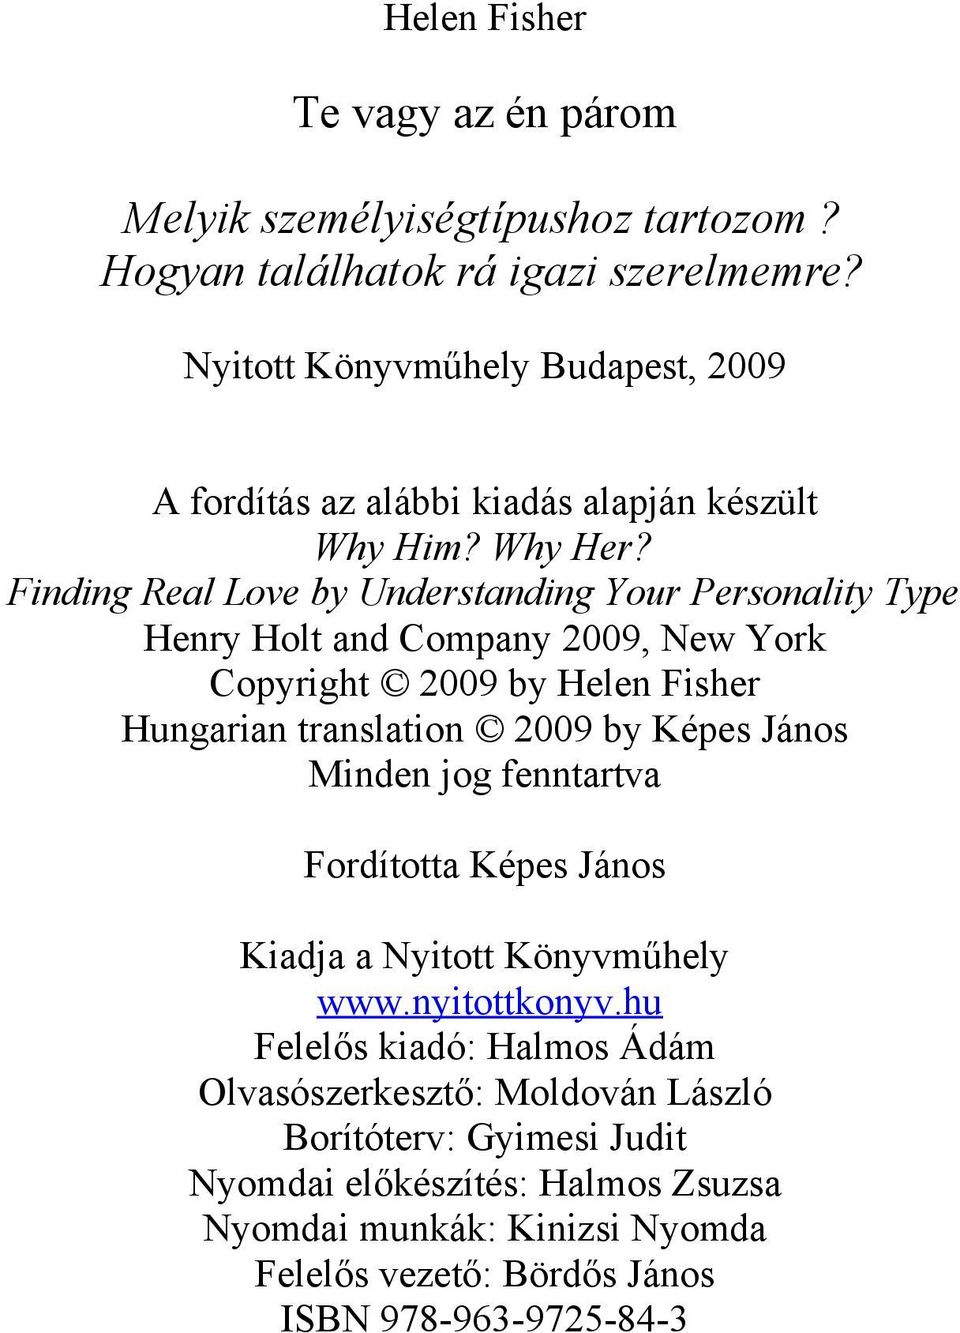 Finding Real Love by Understanding Your Personality Type Henry Holt and Company 2009, New York Copyright 2009 by Helen Fisher Hungarian translation 2009 by Képes János